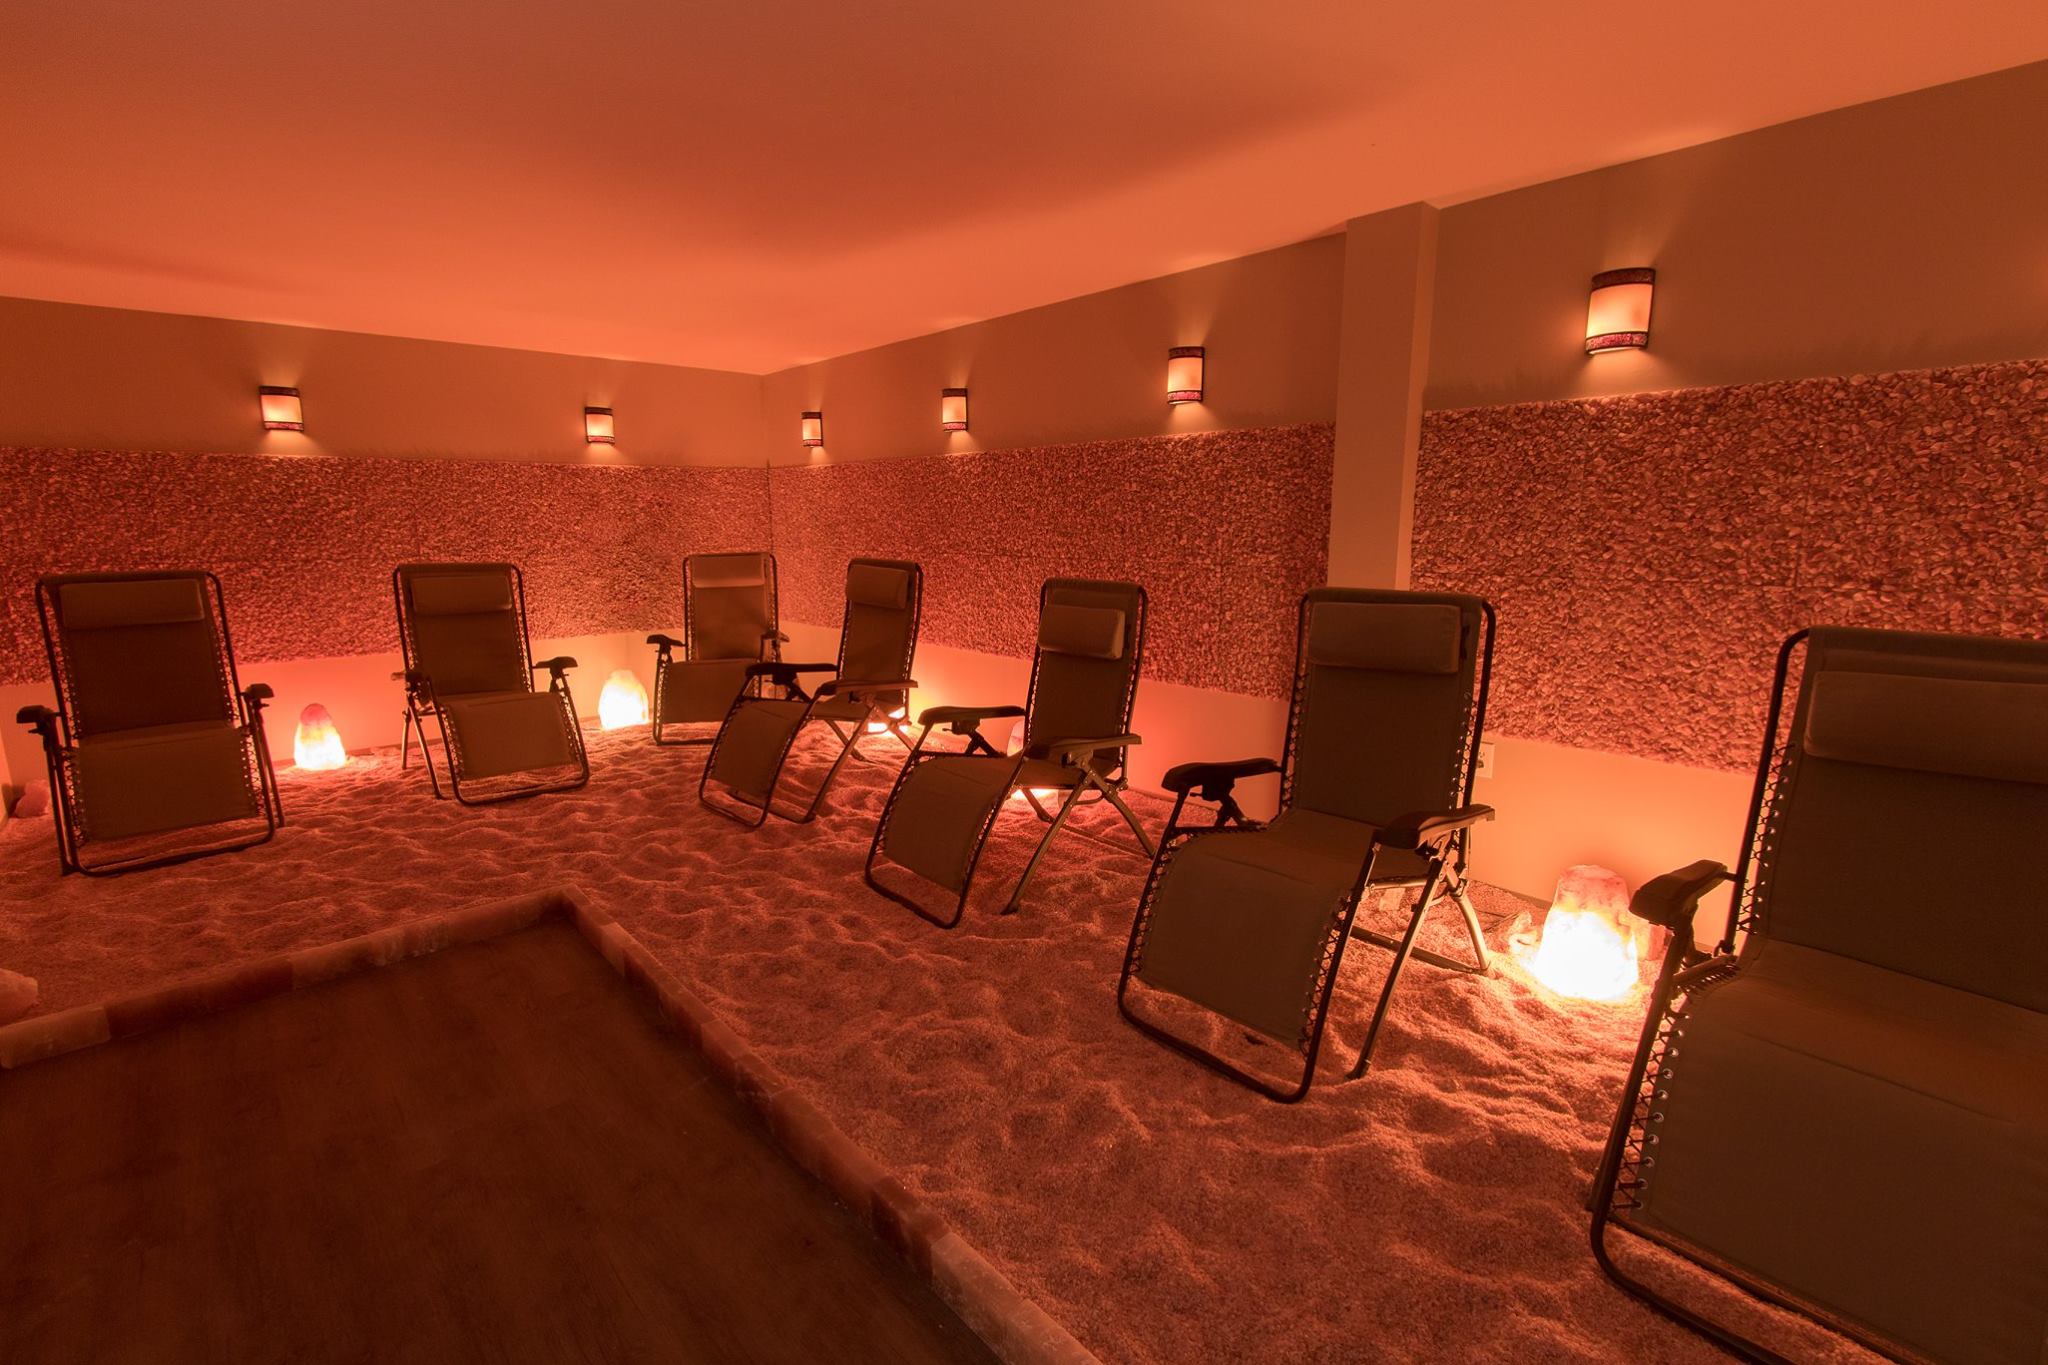 Seven Reclining Chairs In A Dimmed Room On A Salt-Covered Floor With A Centering Line Of Pink Salt Panels Around The Room At The Be Still And Breathe Salt Wellness Center - Lebanon, Tennessee.